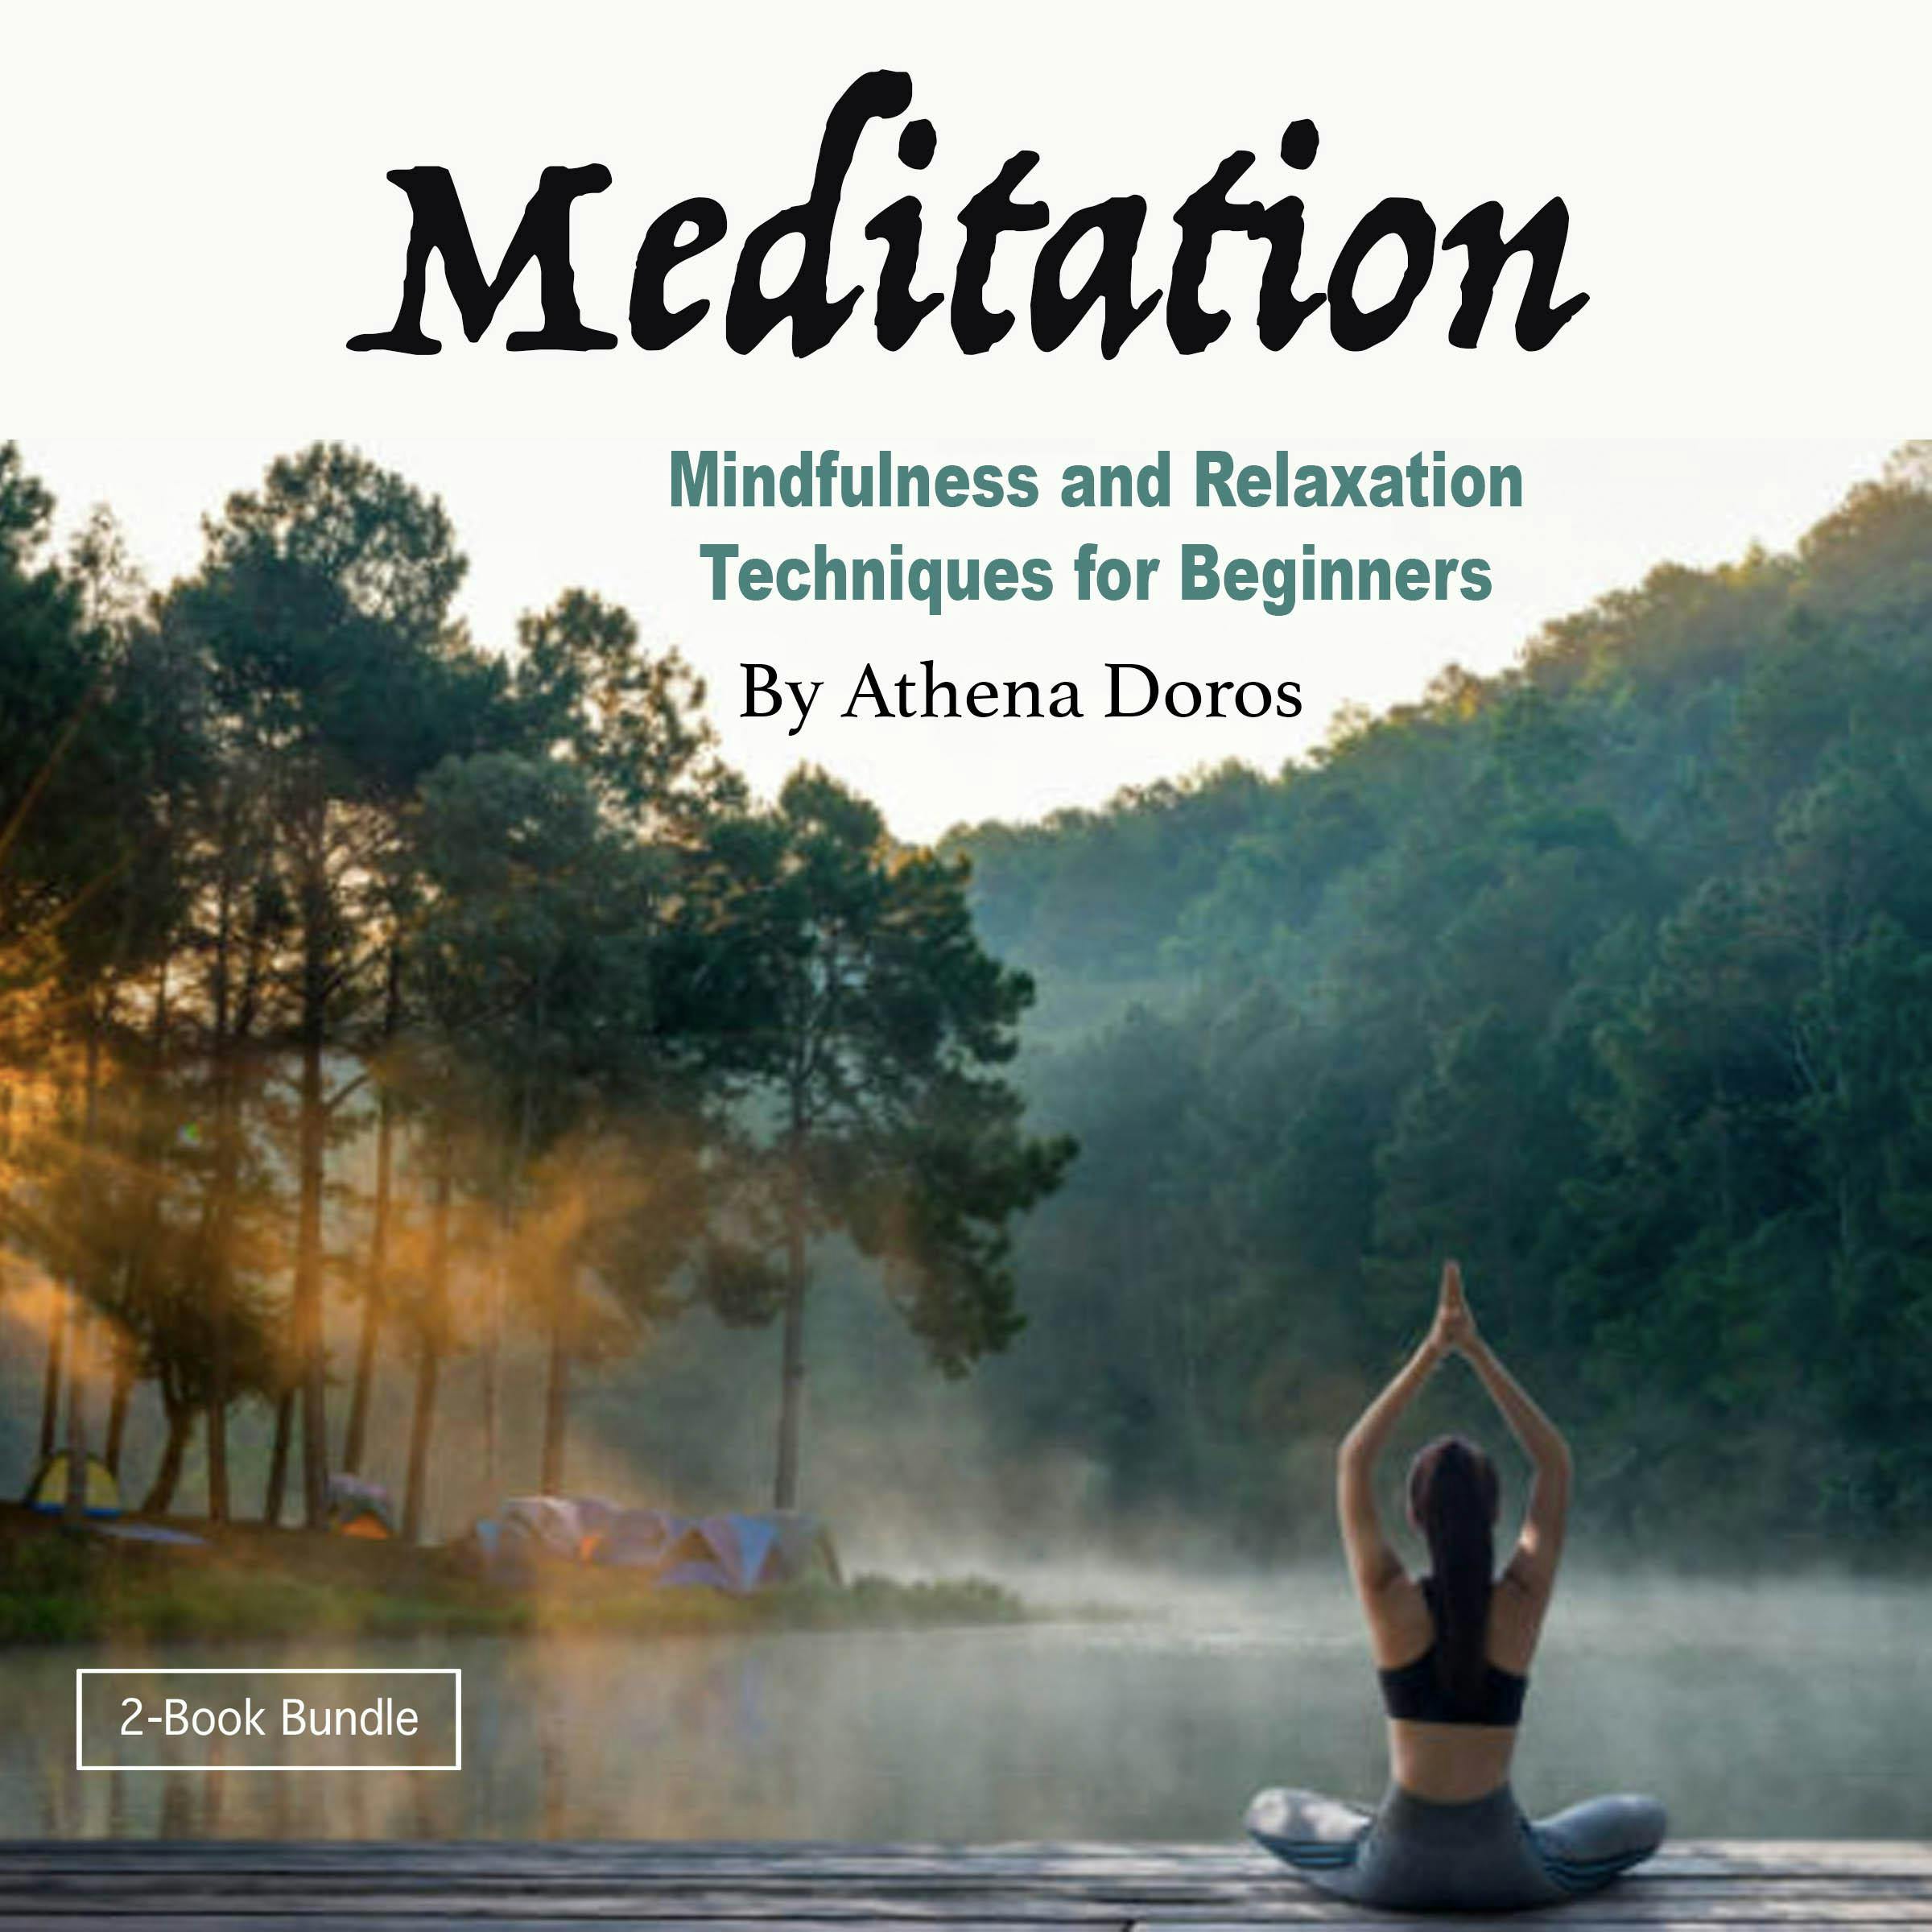 Meditation: Mindfulness and Relaxation Techniques for Beginners - Athena Doros